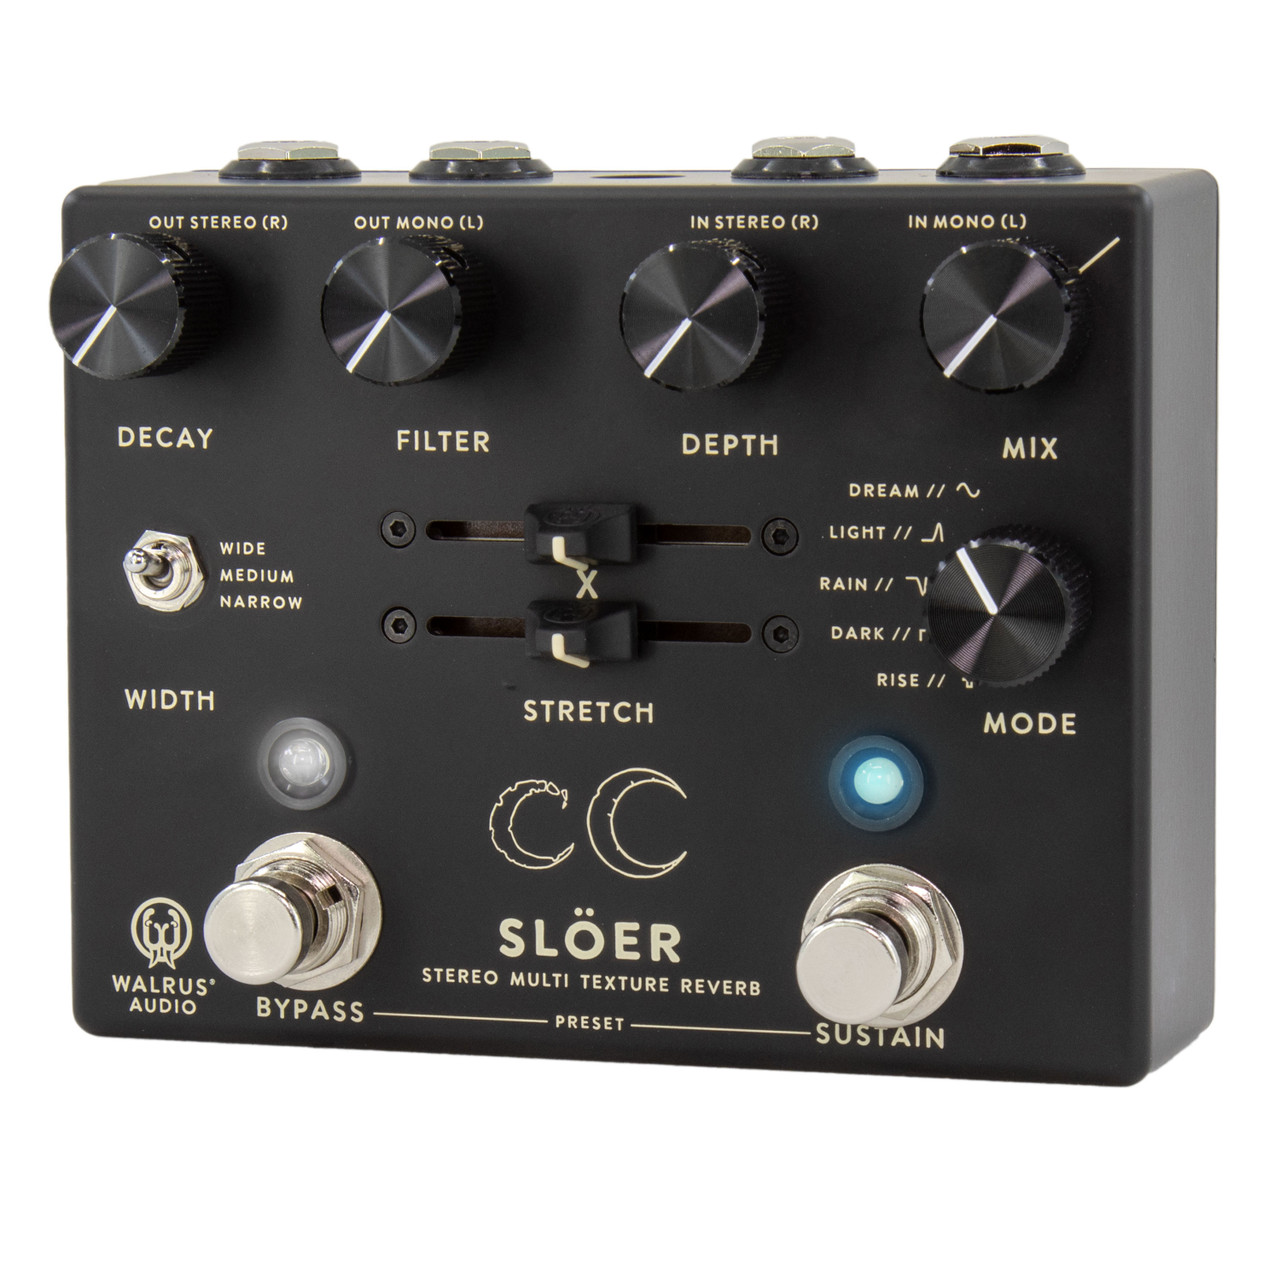 Walrus Audio Slöer Stereo Ambient Reverb in Black